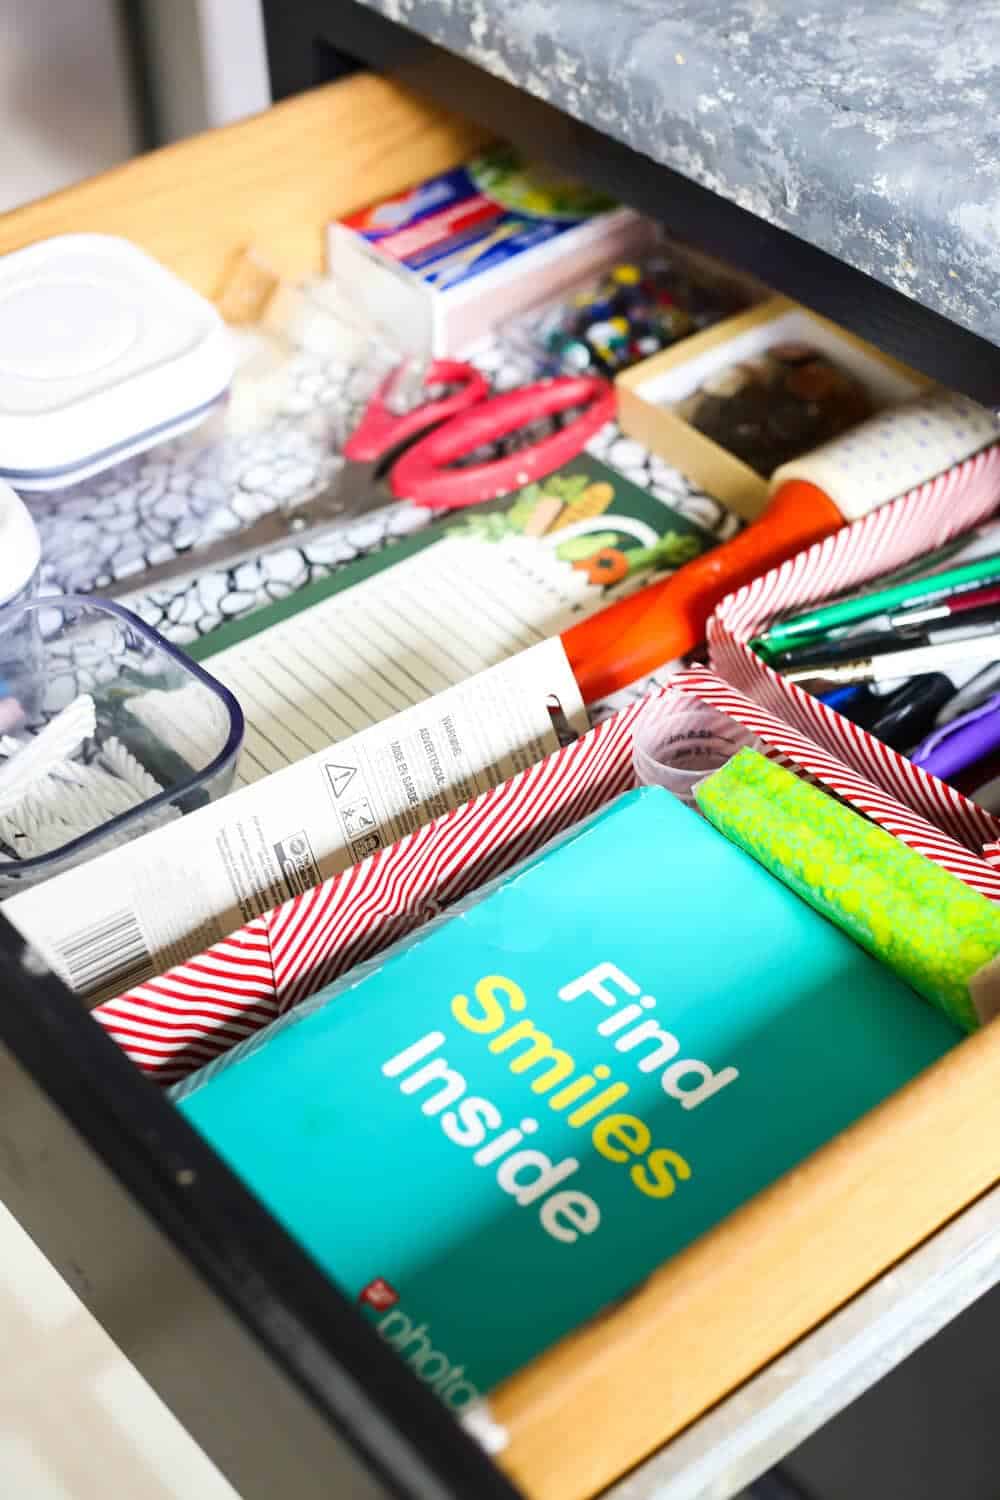 Tips on junk drawer organization - how to get your junk drawer completely organized without having to spend any money! Great, affordable solutions for a messy kitchen! 